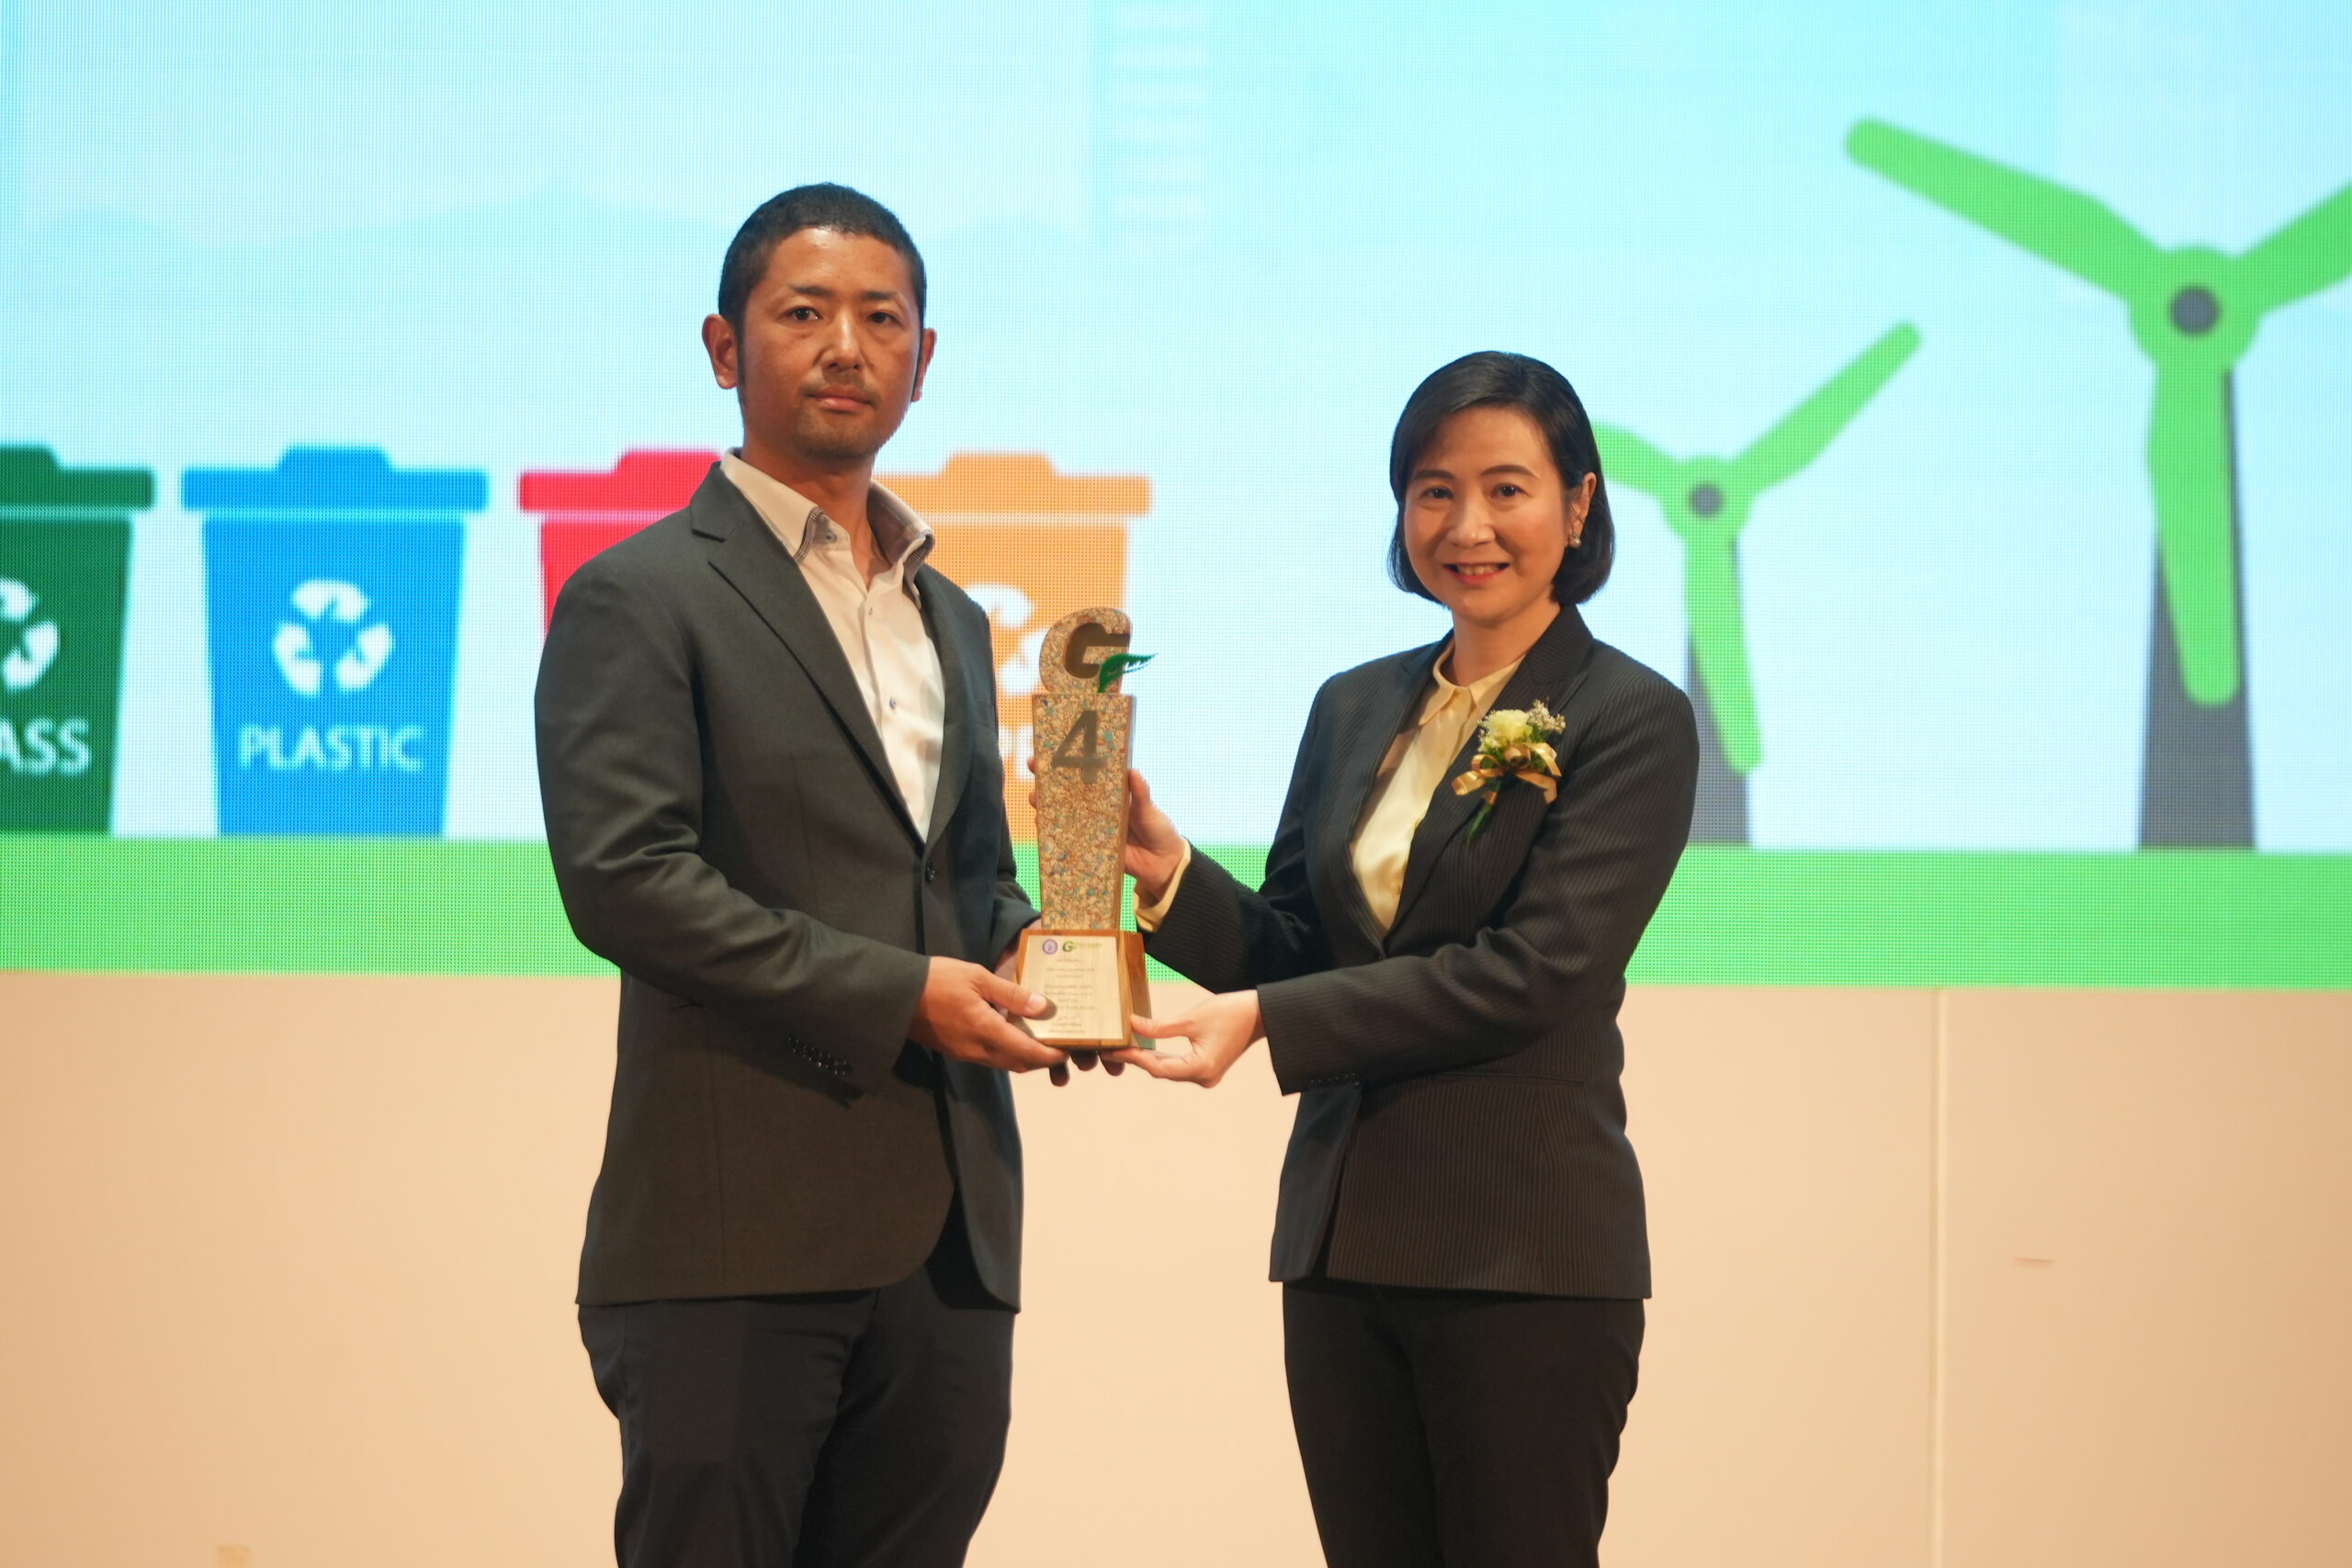 Archem (Thailand) Certified as a Green Industry Level 4 Company by Thailand’s Ministry of Industry